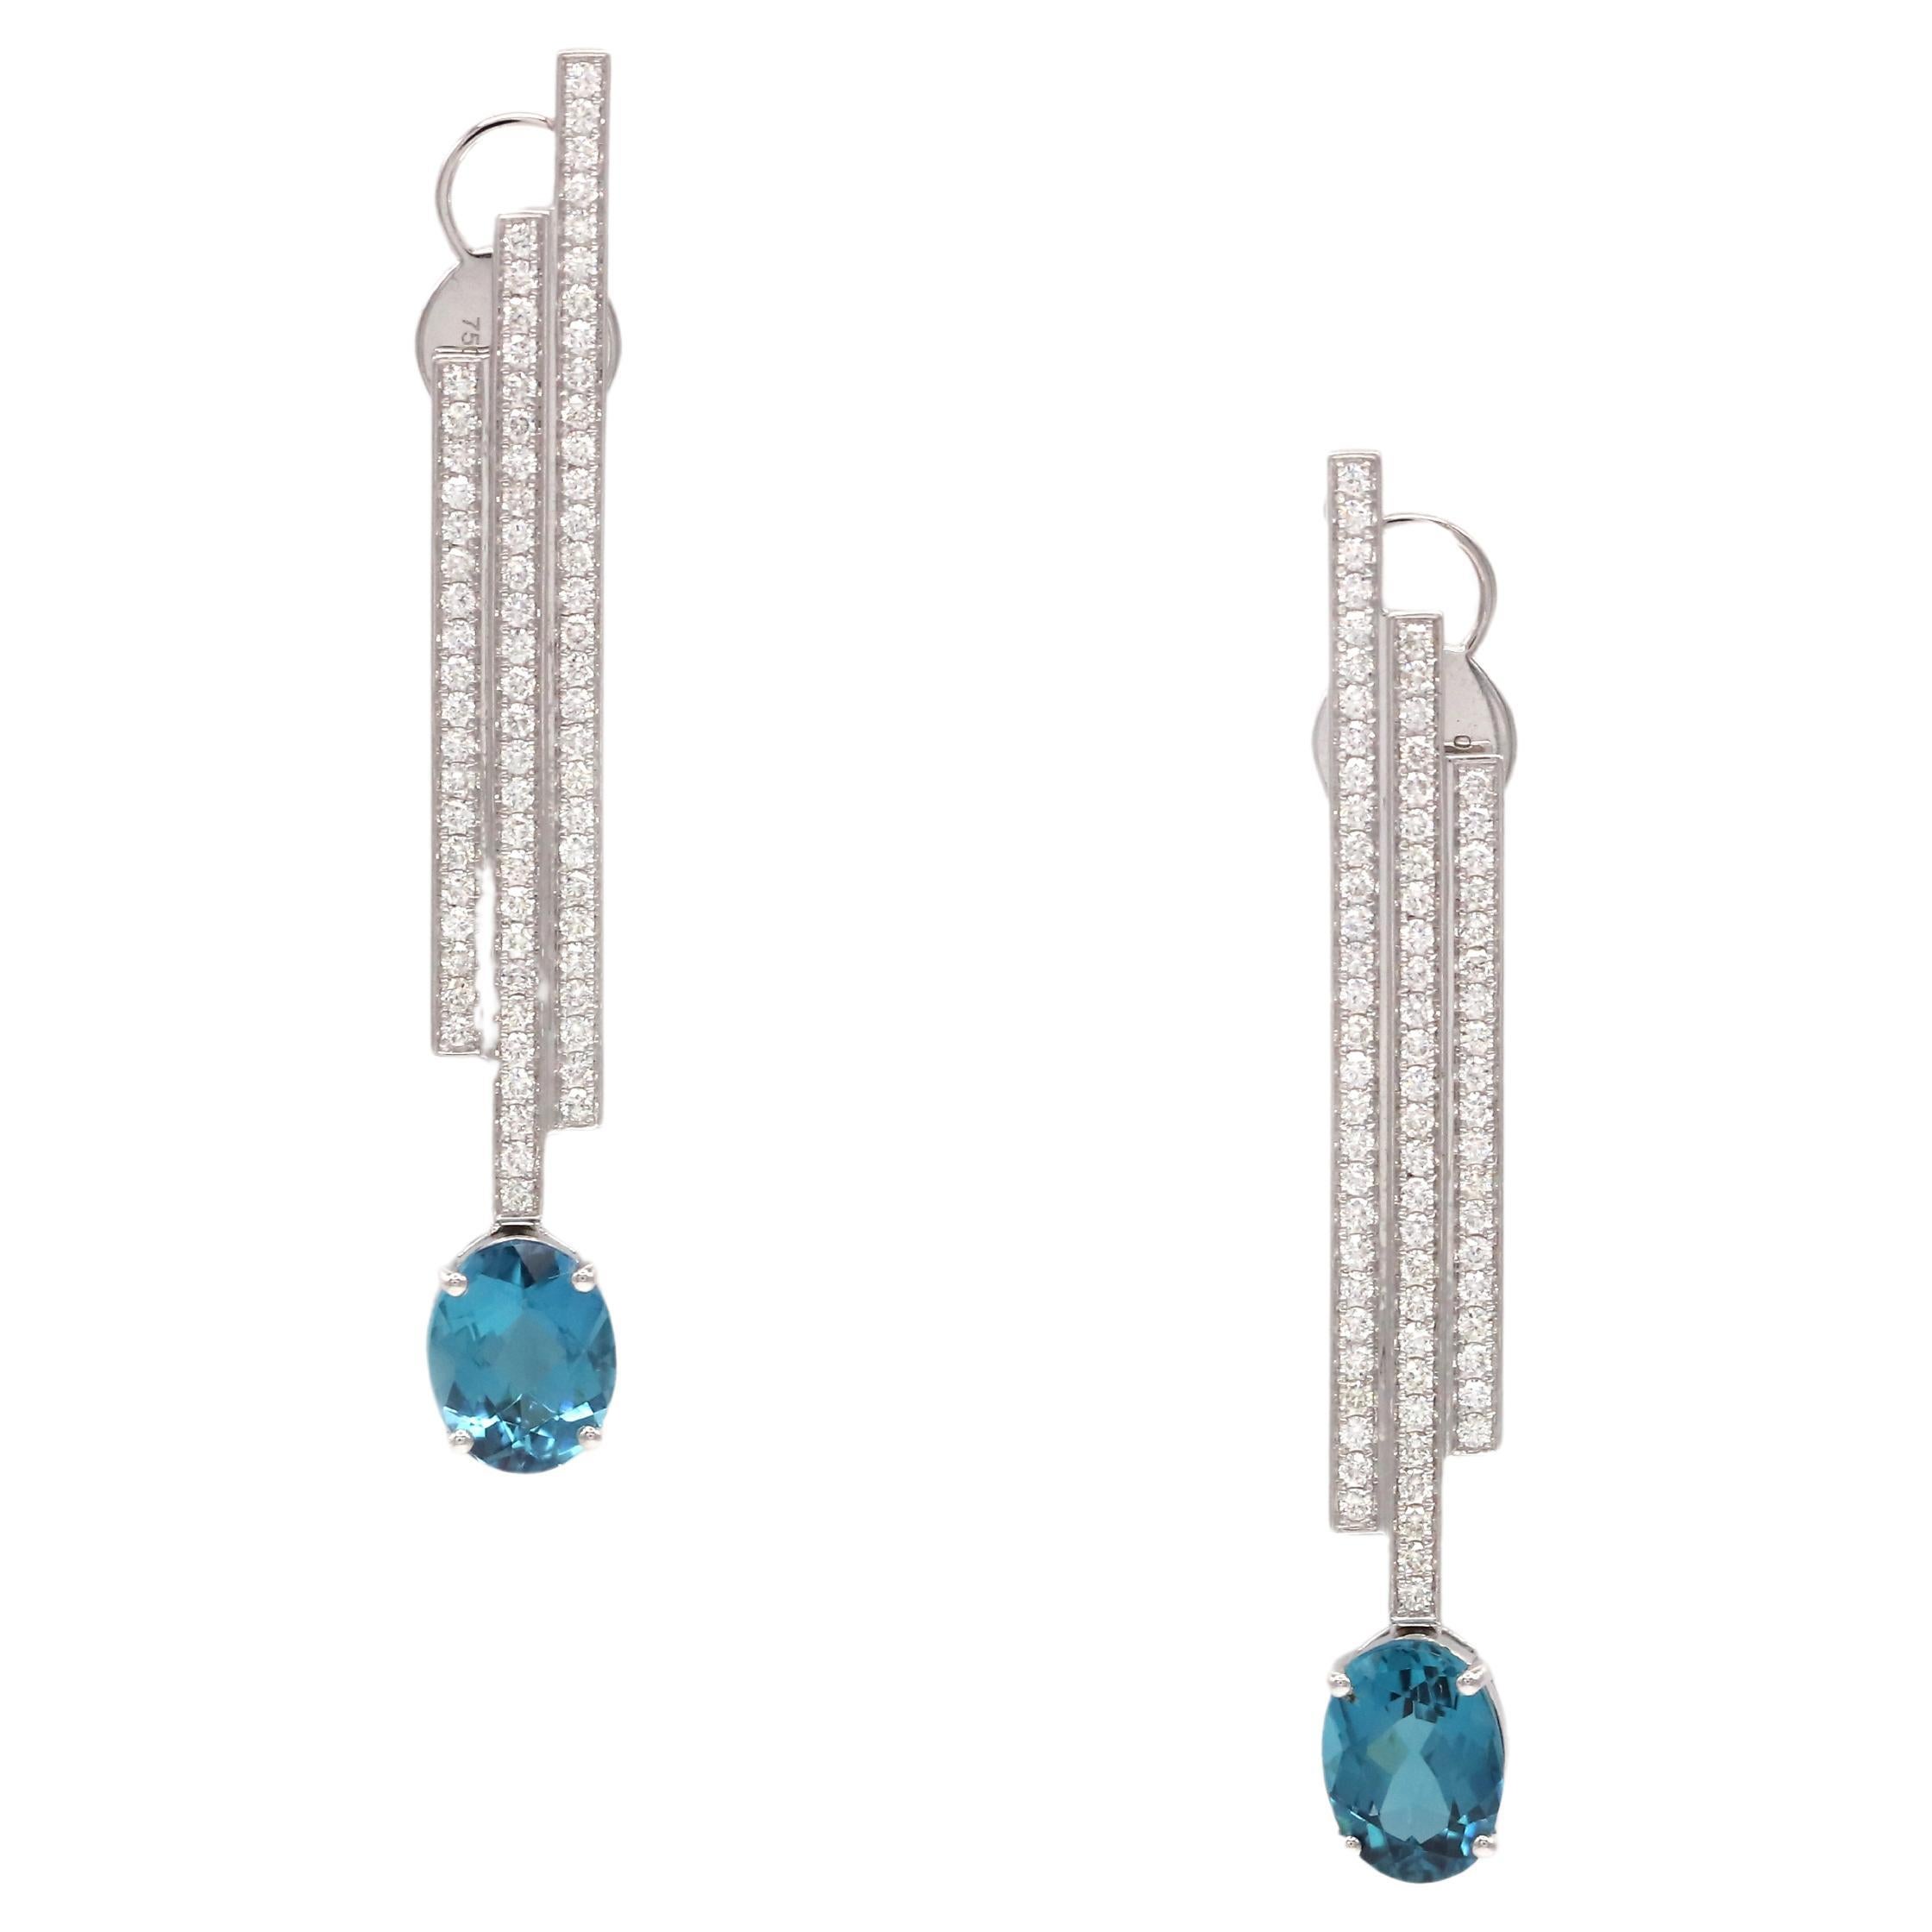 Ring (Matching Earrings Available)

18K White Gold 

Diamond

Tourmaline 

 Size-52

Immerse yourself in the opulent style of the Art Deco era with these exquisite earrings, crafted from 7.12 grams of 18k white gold. These elegant pieces feature a